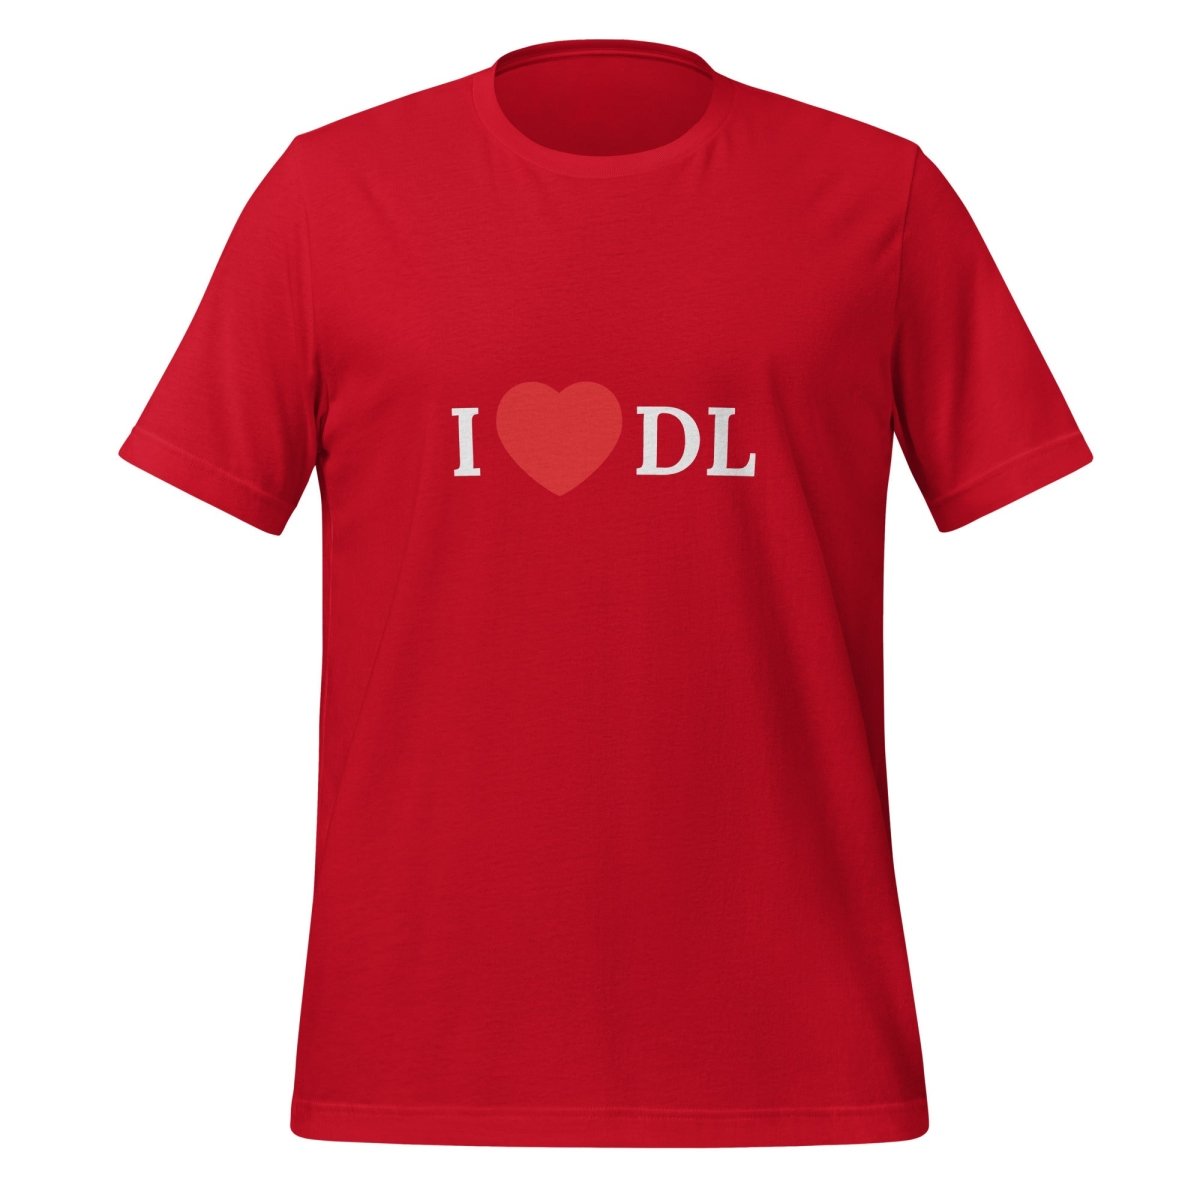 I Love DL (Deep Learning) T - Shirt (unisex) - AI Store